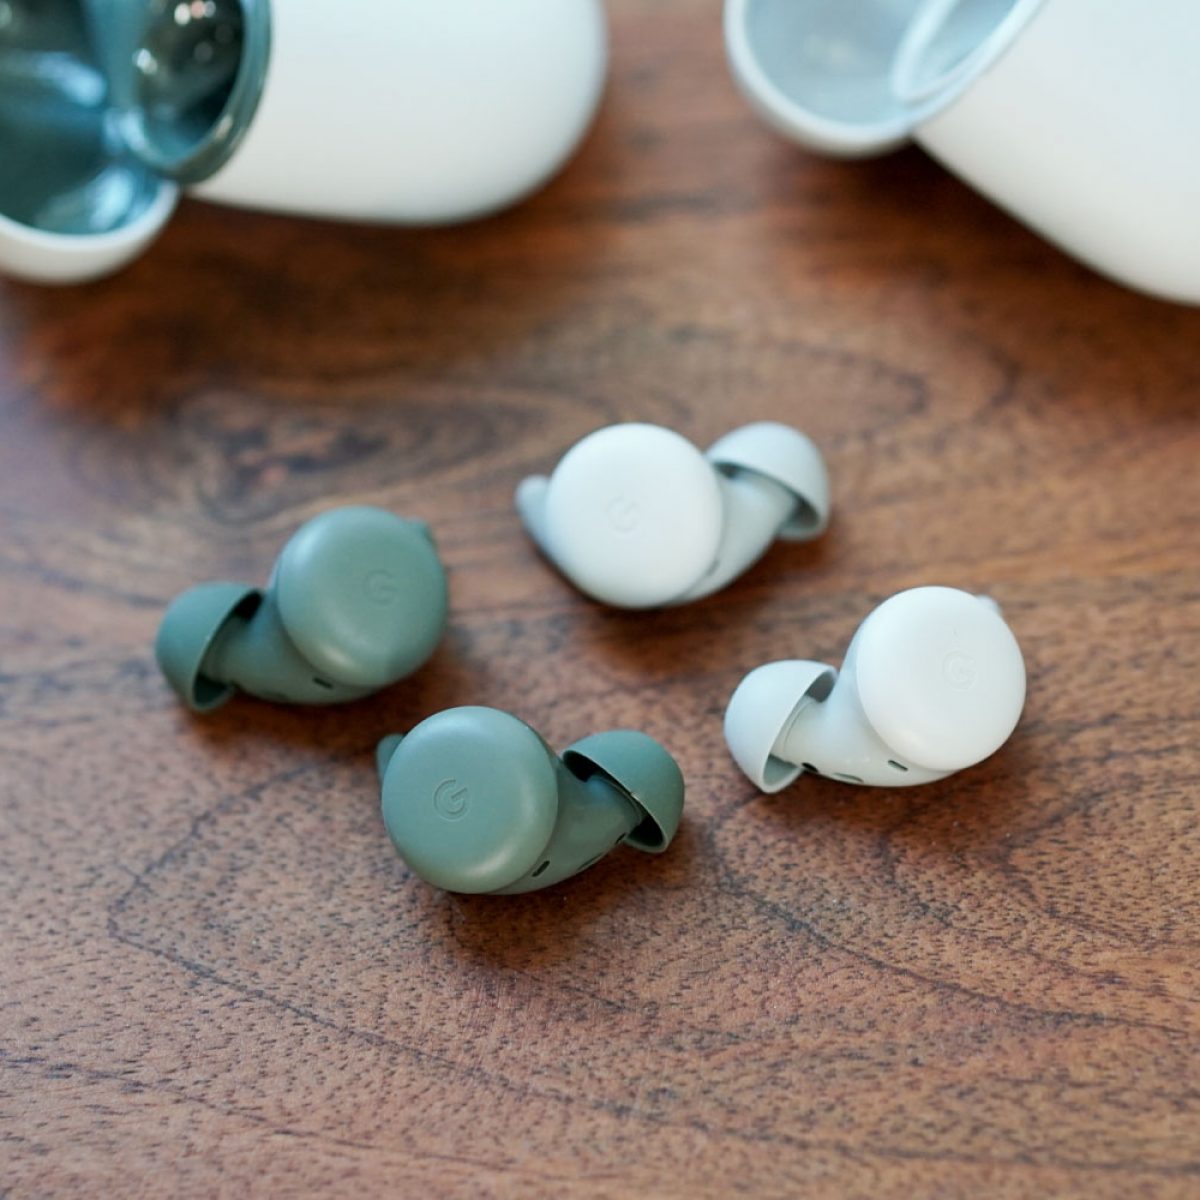 Pixel Buds A-Series Review: Pretty Good Buds